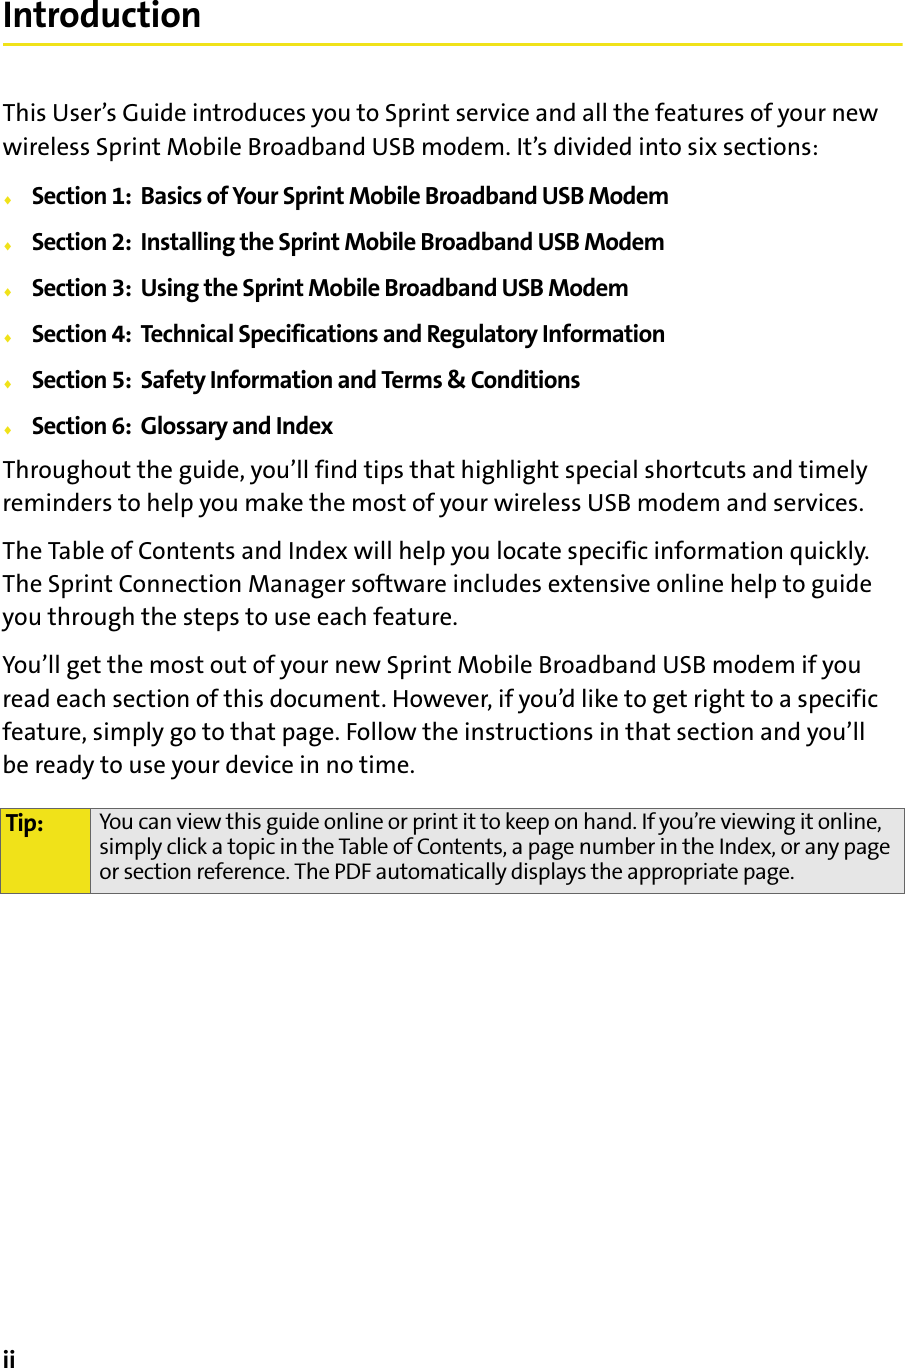 iiIntroductionThis User’s Guide introduces you to Sprint service and all the features of your new wireless Sprint Mobile Broadband USB modem. It’s divided into six sections:⽧Section 1:  Basics of Your Sprint Mobile Broadband USB Modem⽧Section 2:  Installing the Sprint Mobile Broadband USB Modem⽧Section 3:  Using the Sprint Mobile Broadband USB Modem⽧Section 4:  Technical Specifications and Regulatory Information⽧Section 5:  Safety Information and Terms &amp; Conditions⽧Section 6:  Glossary and IndexThroughout the guide, you’ll find tips that highlight special shortcuts and timely reminders to help you make the most of your wireless USB modem and services.The Table of Contents and Index will help you locate specific information quickly. The Sprint Connection Manager software includes extensive online help to guide you through the steps to use each feature.You’ll get the most out of your new Sprint Mobile Broadband USB modem if you read each section of this document. However, if you’d like to get right to a specific feature, simply go to that page. Follow the instructions in that section and you’ll be ready to use your device in no time.Tip: You can view this guide online or print it to keep on hand. If you’re viewing it online, simply click a topic in the Table of Contents, a page number in the Index, or any page or section reference. The PDF automatically displays the appropriate page.